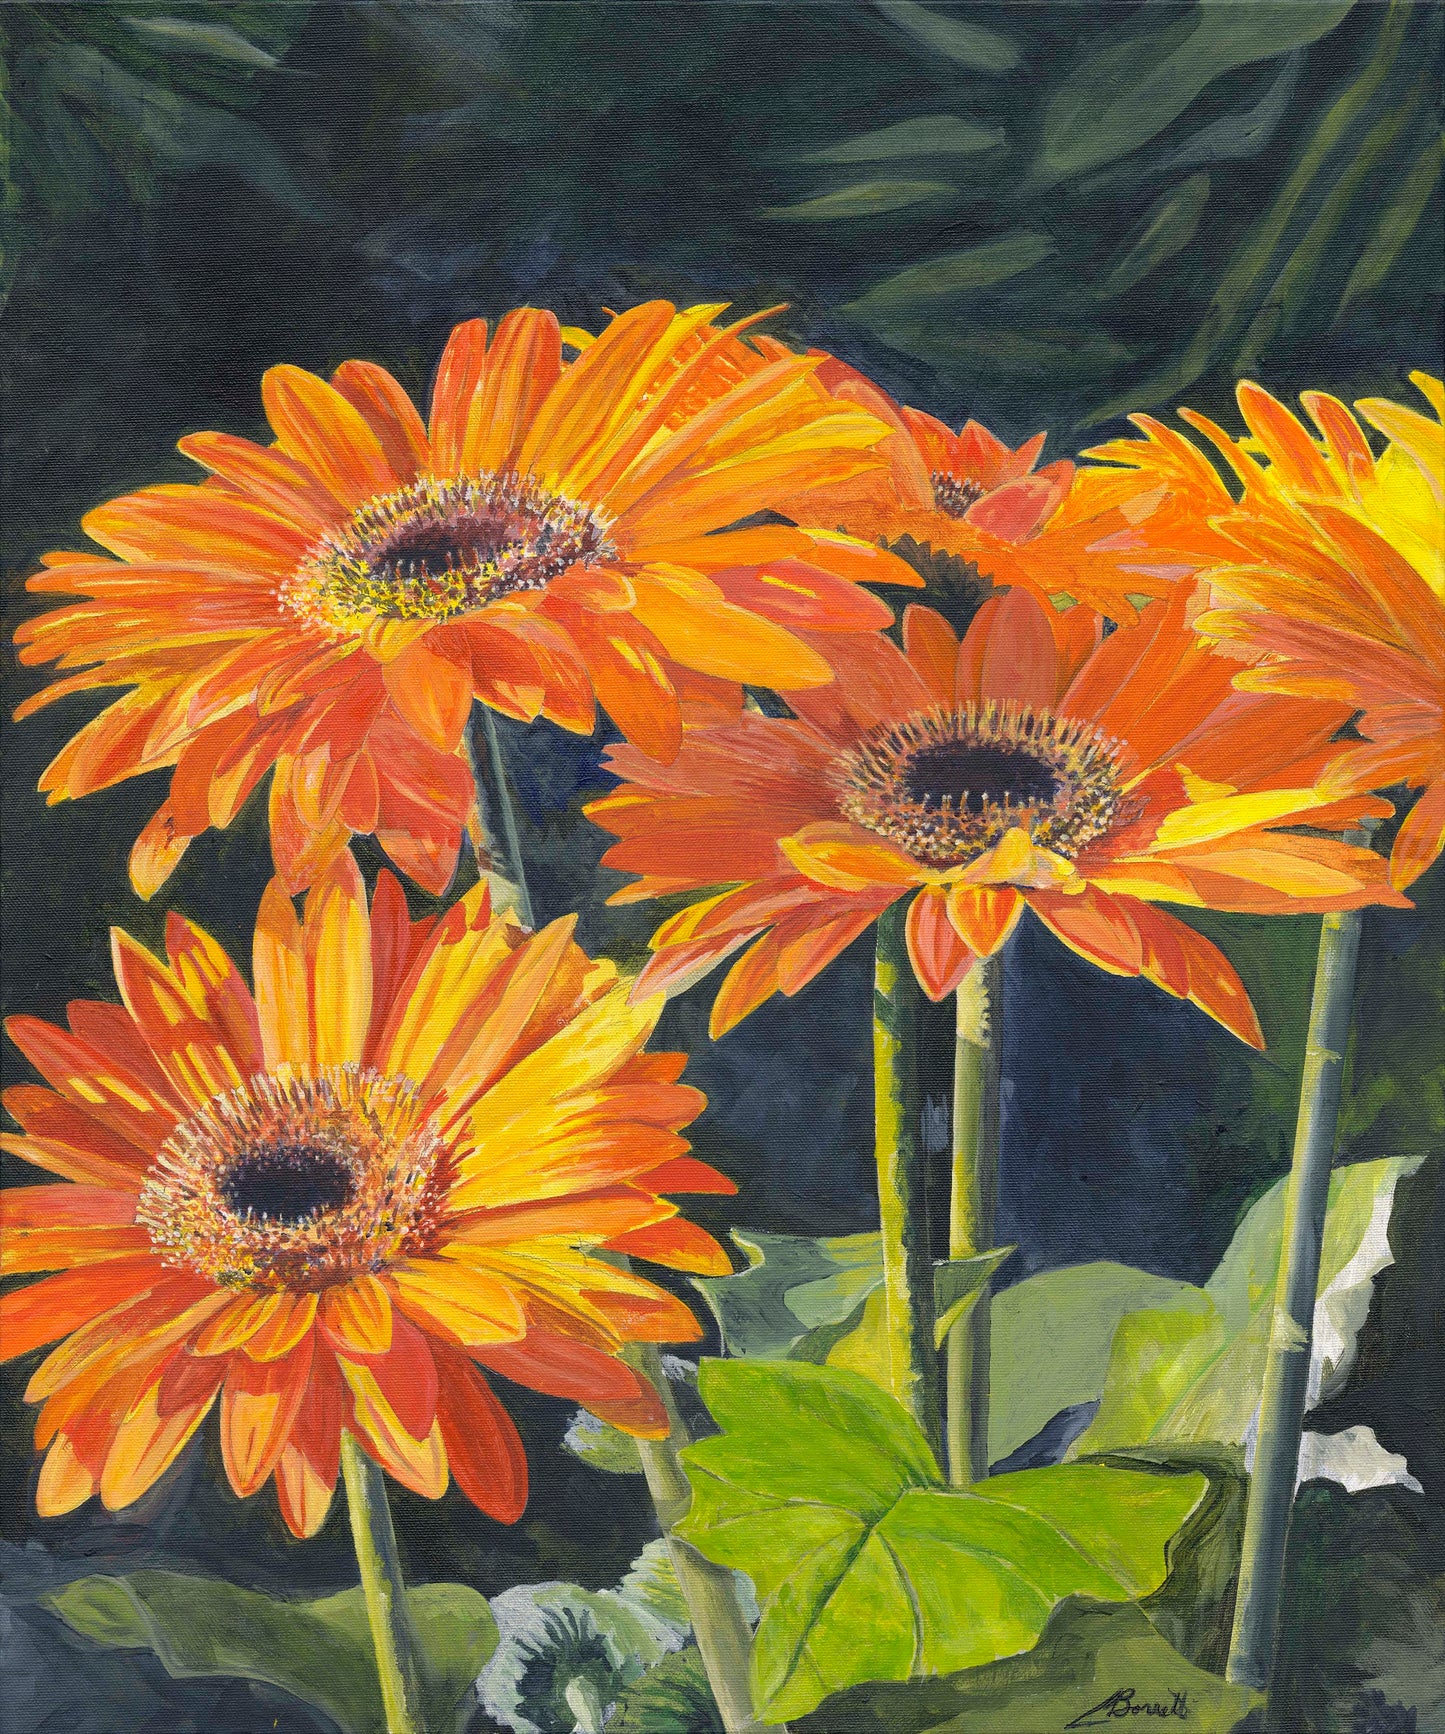 Audacious Daisies - Print to fit 16" x 20"